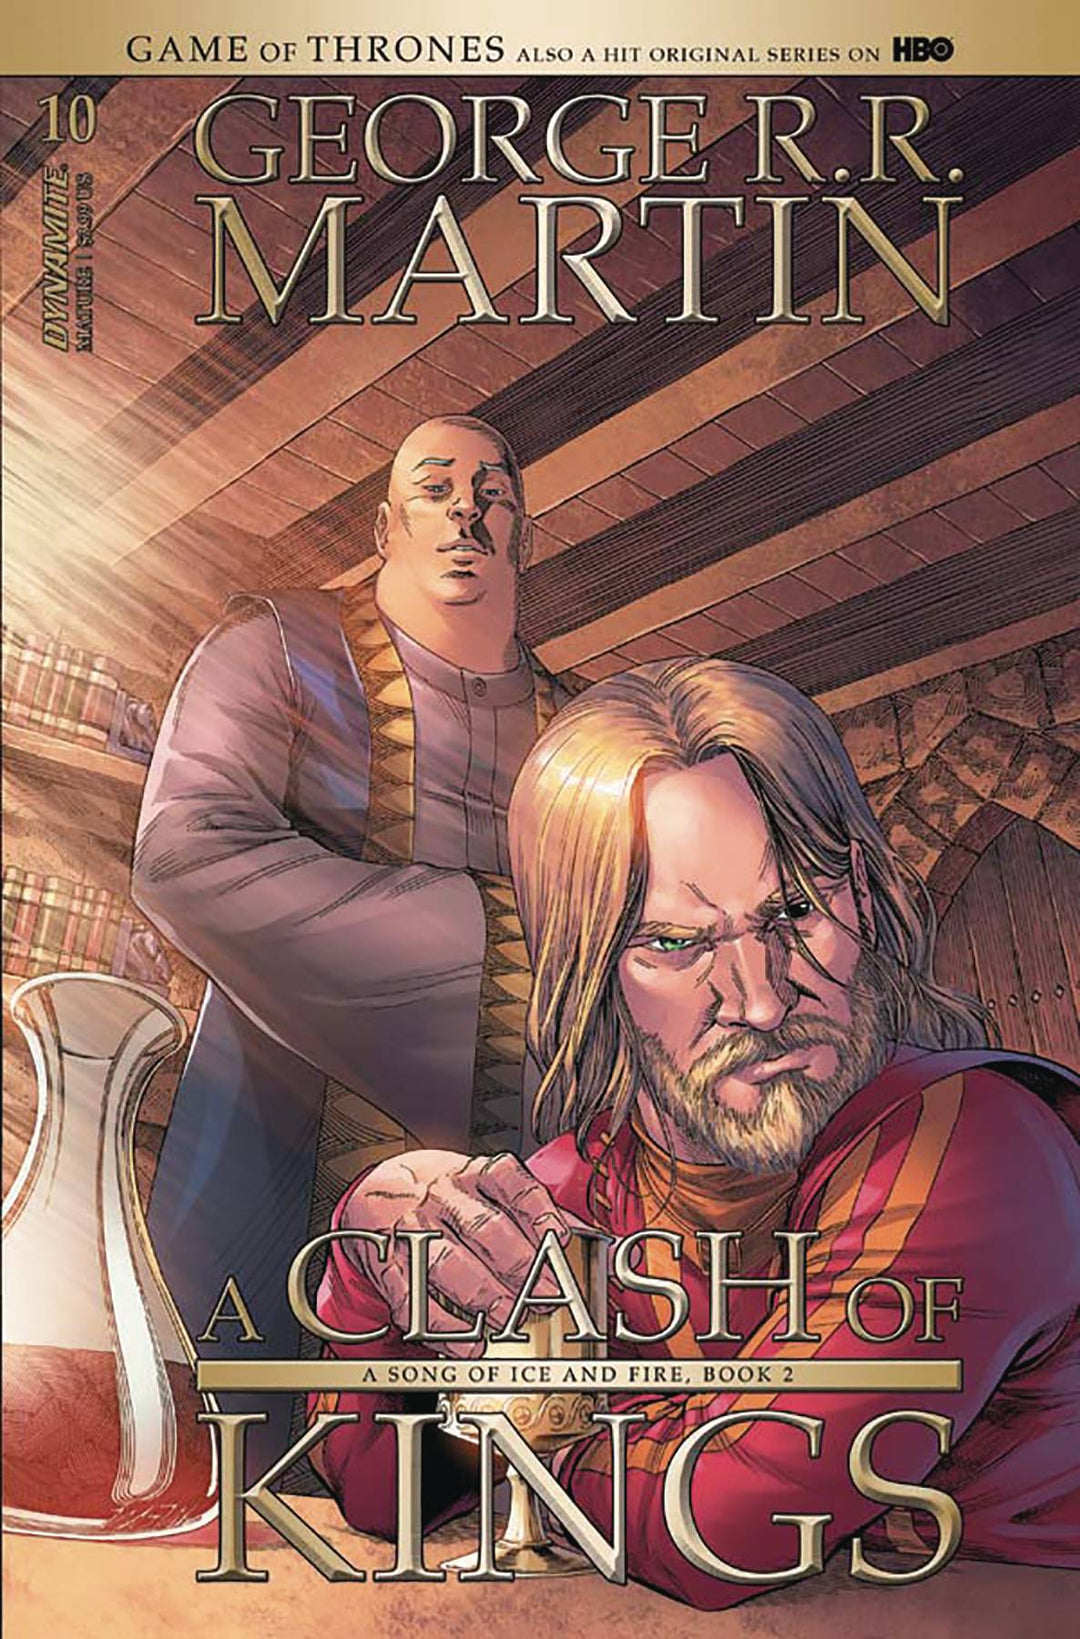 A Clash of Kings: Graphic Novel, Volume One by George R.R. Martin